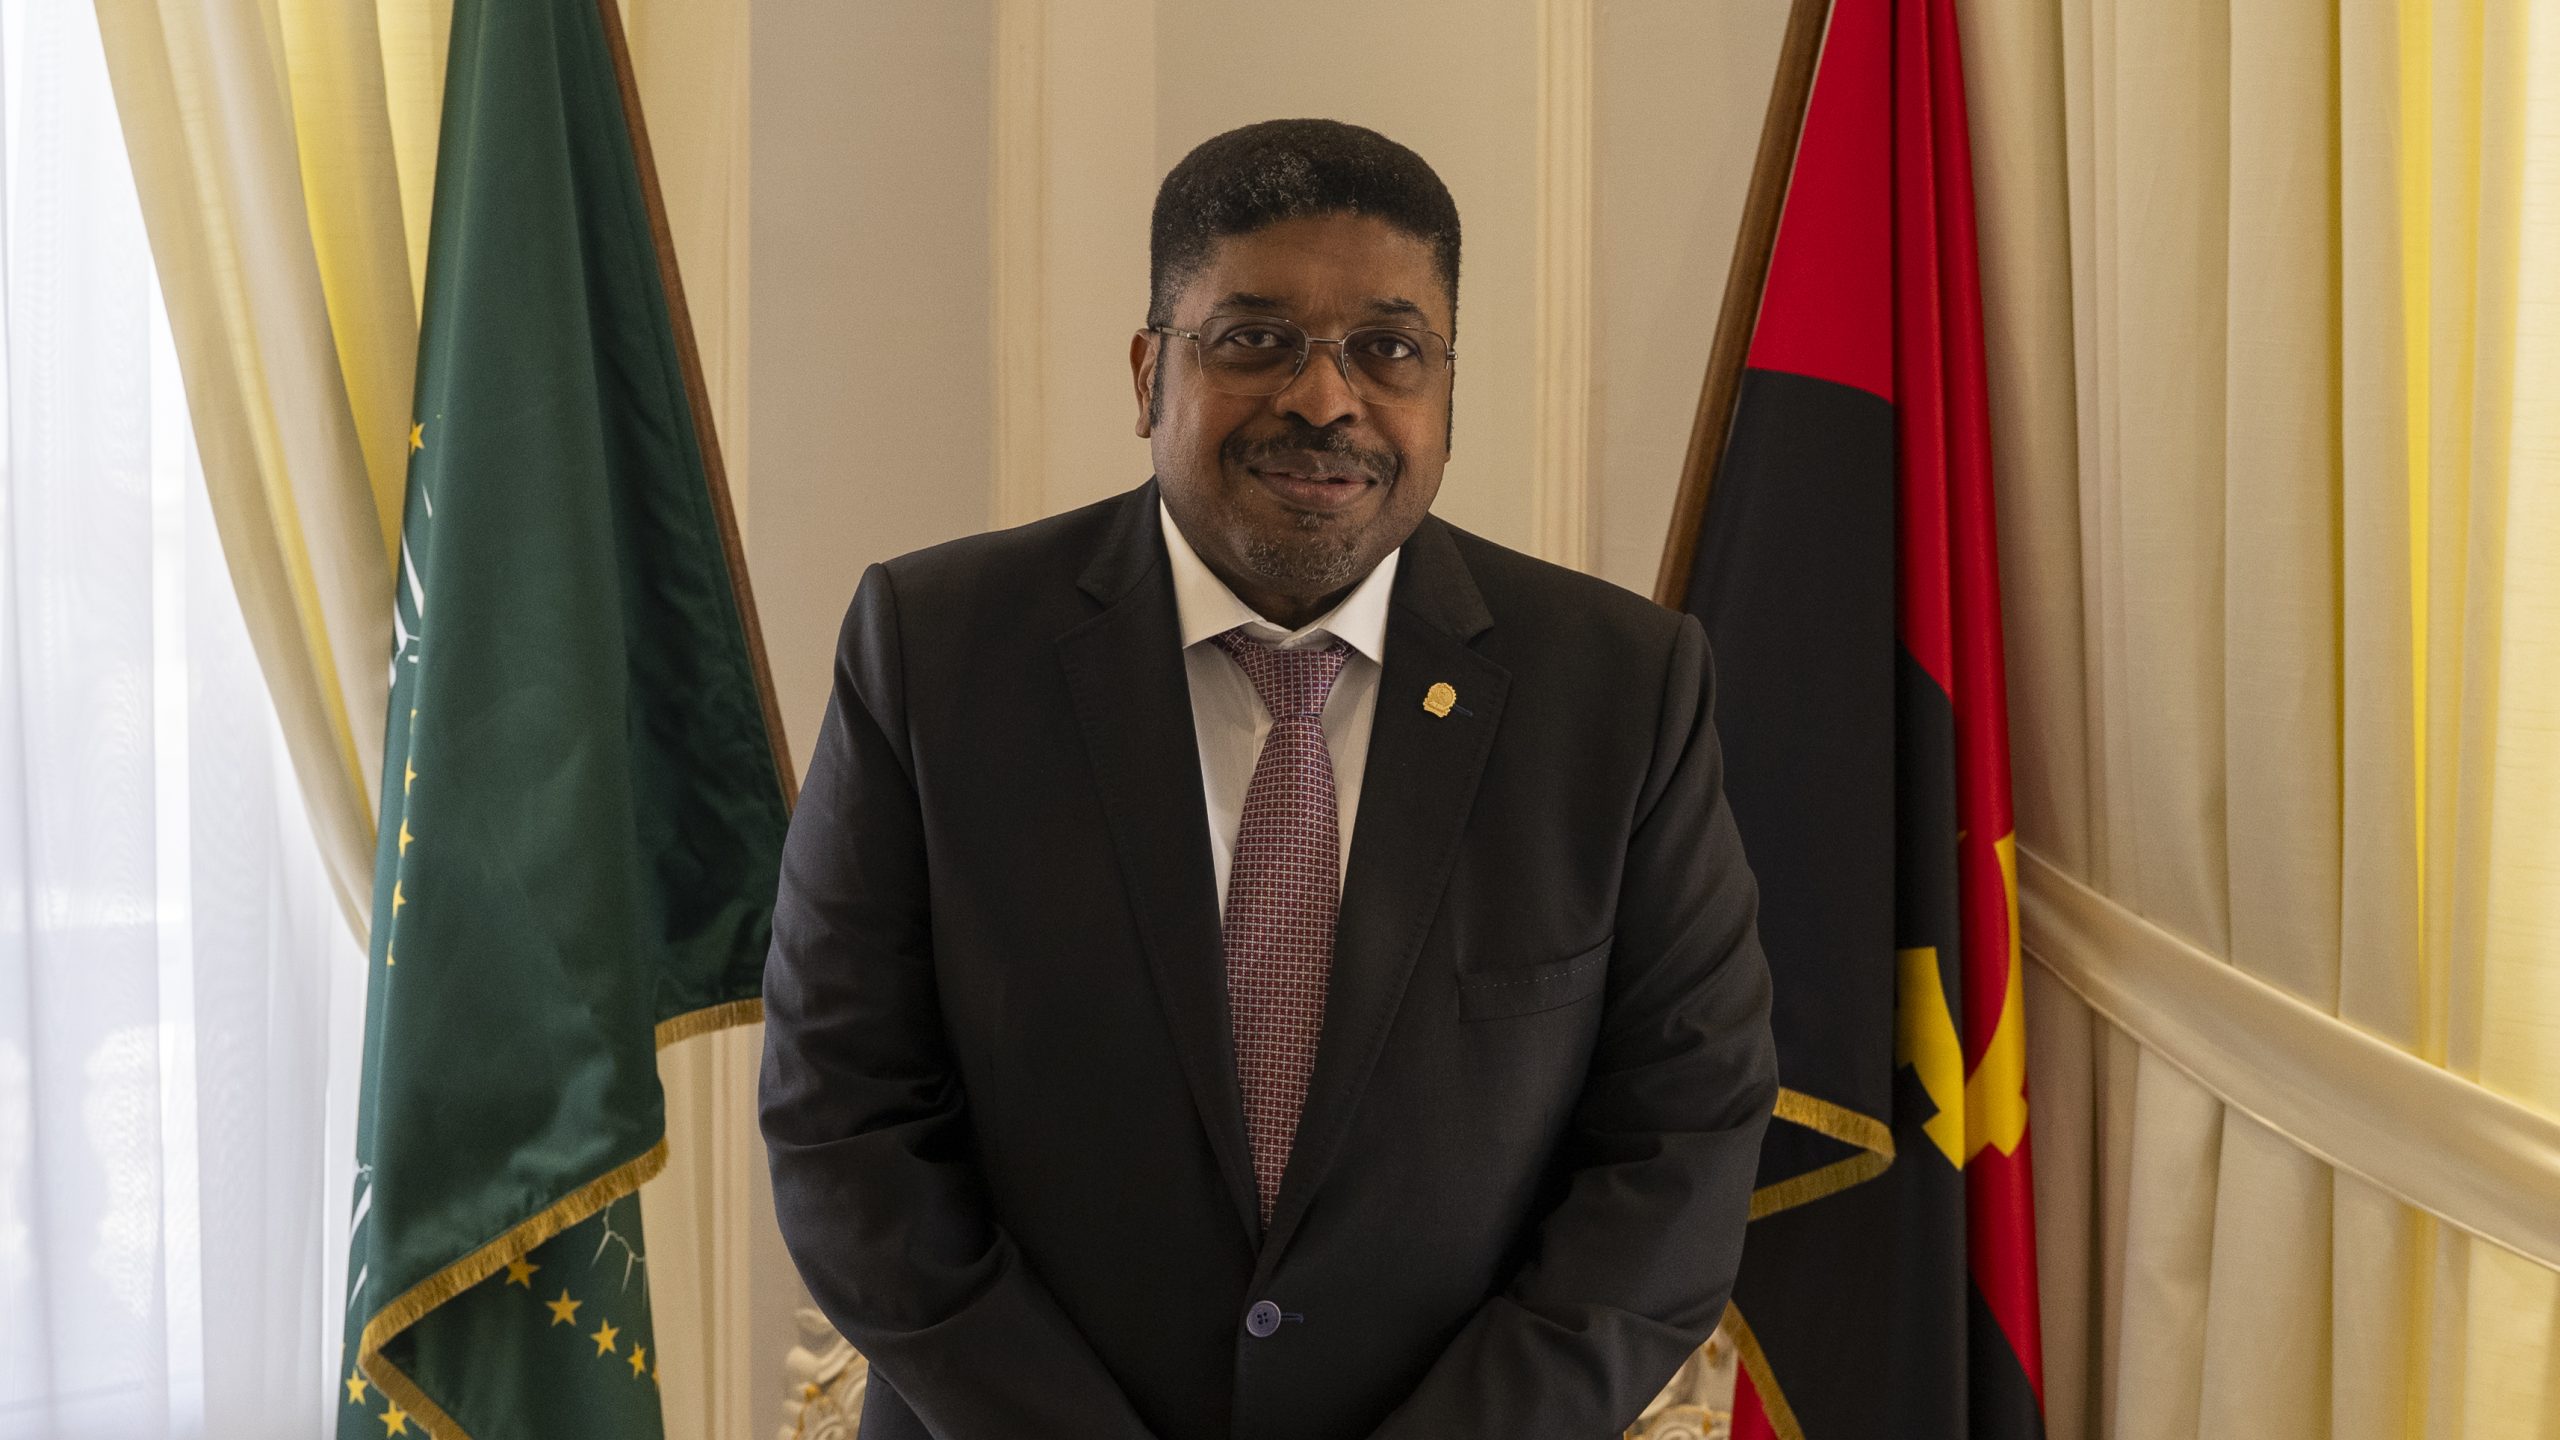 Energy, investment, tourism: Angola envoy says ‘plenty of space’ available to evolve relations with Qatar